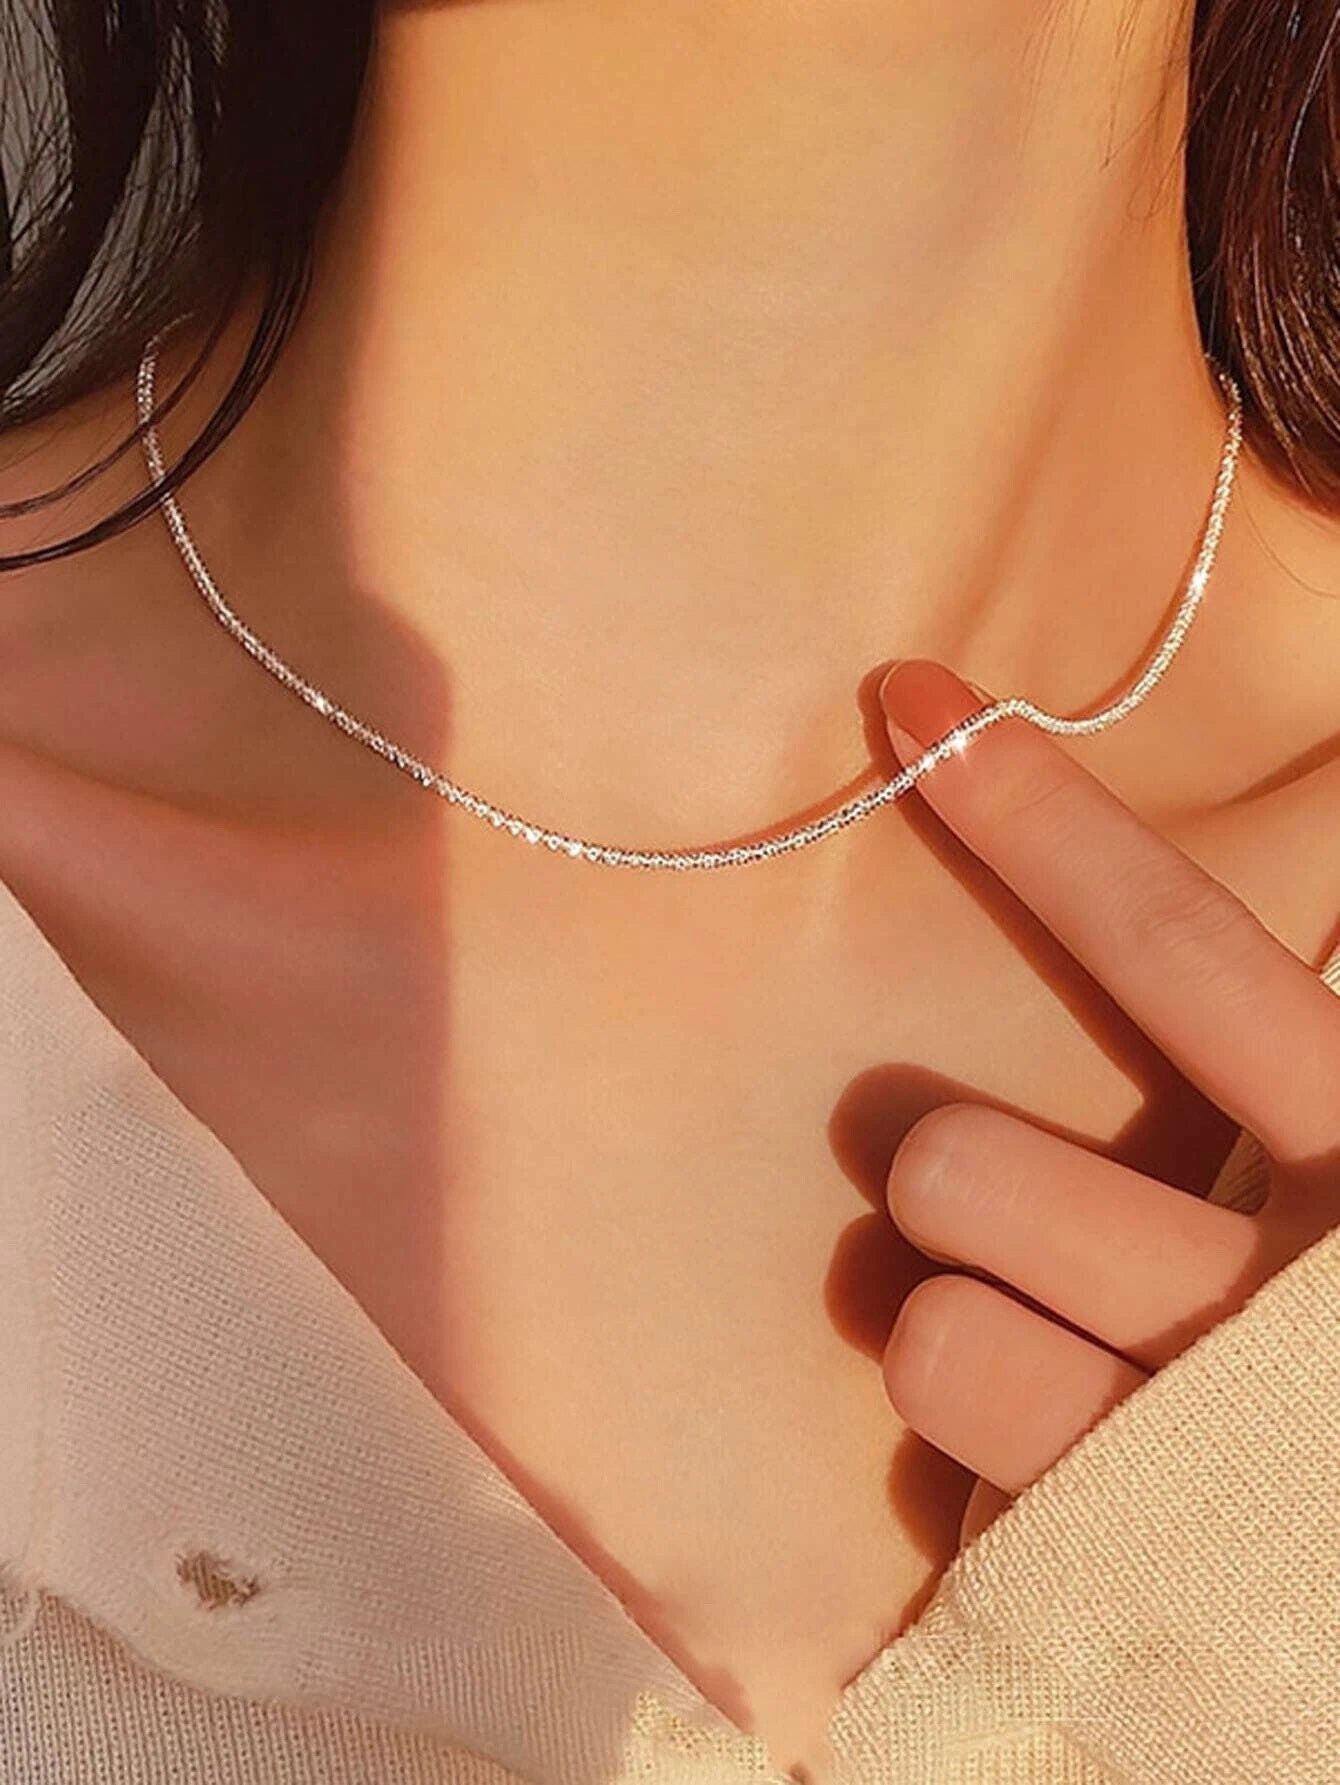 Elegant Adornments: Silver Chains for Every Occasion